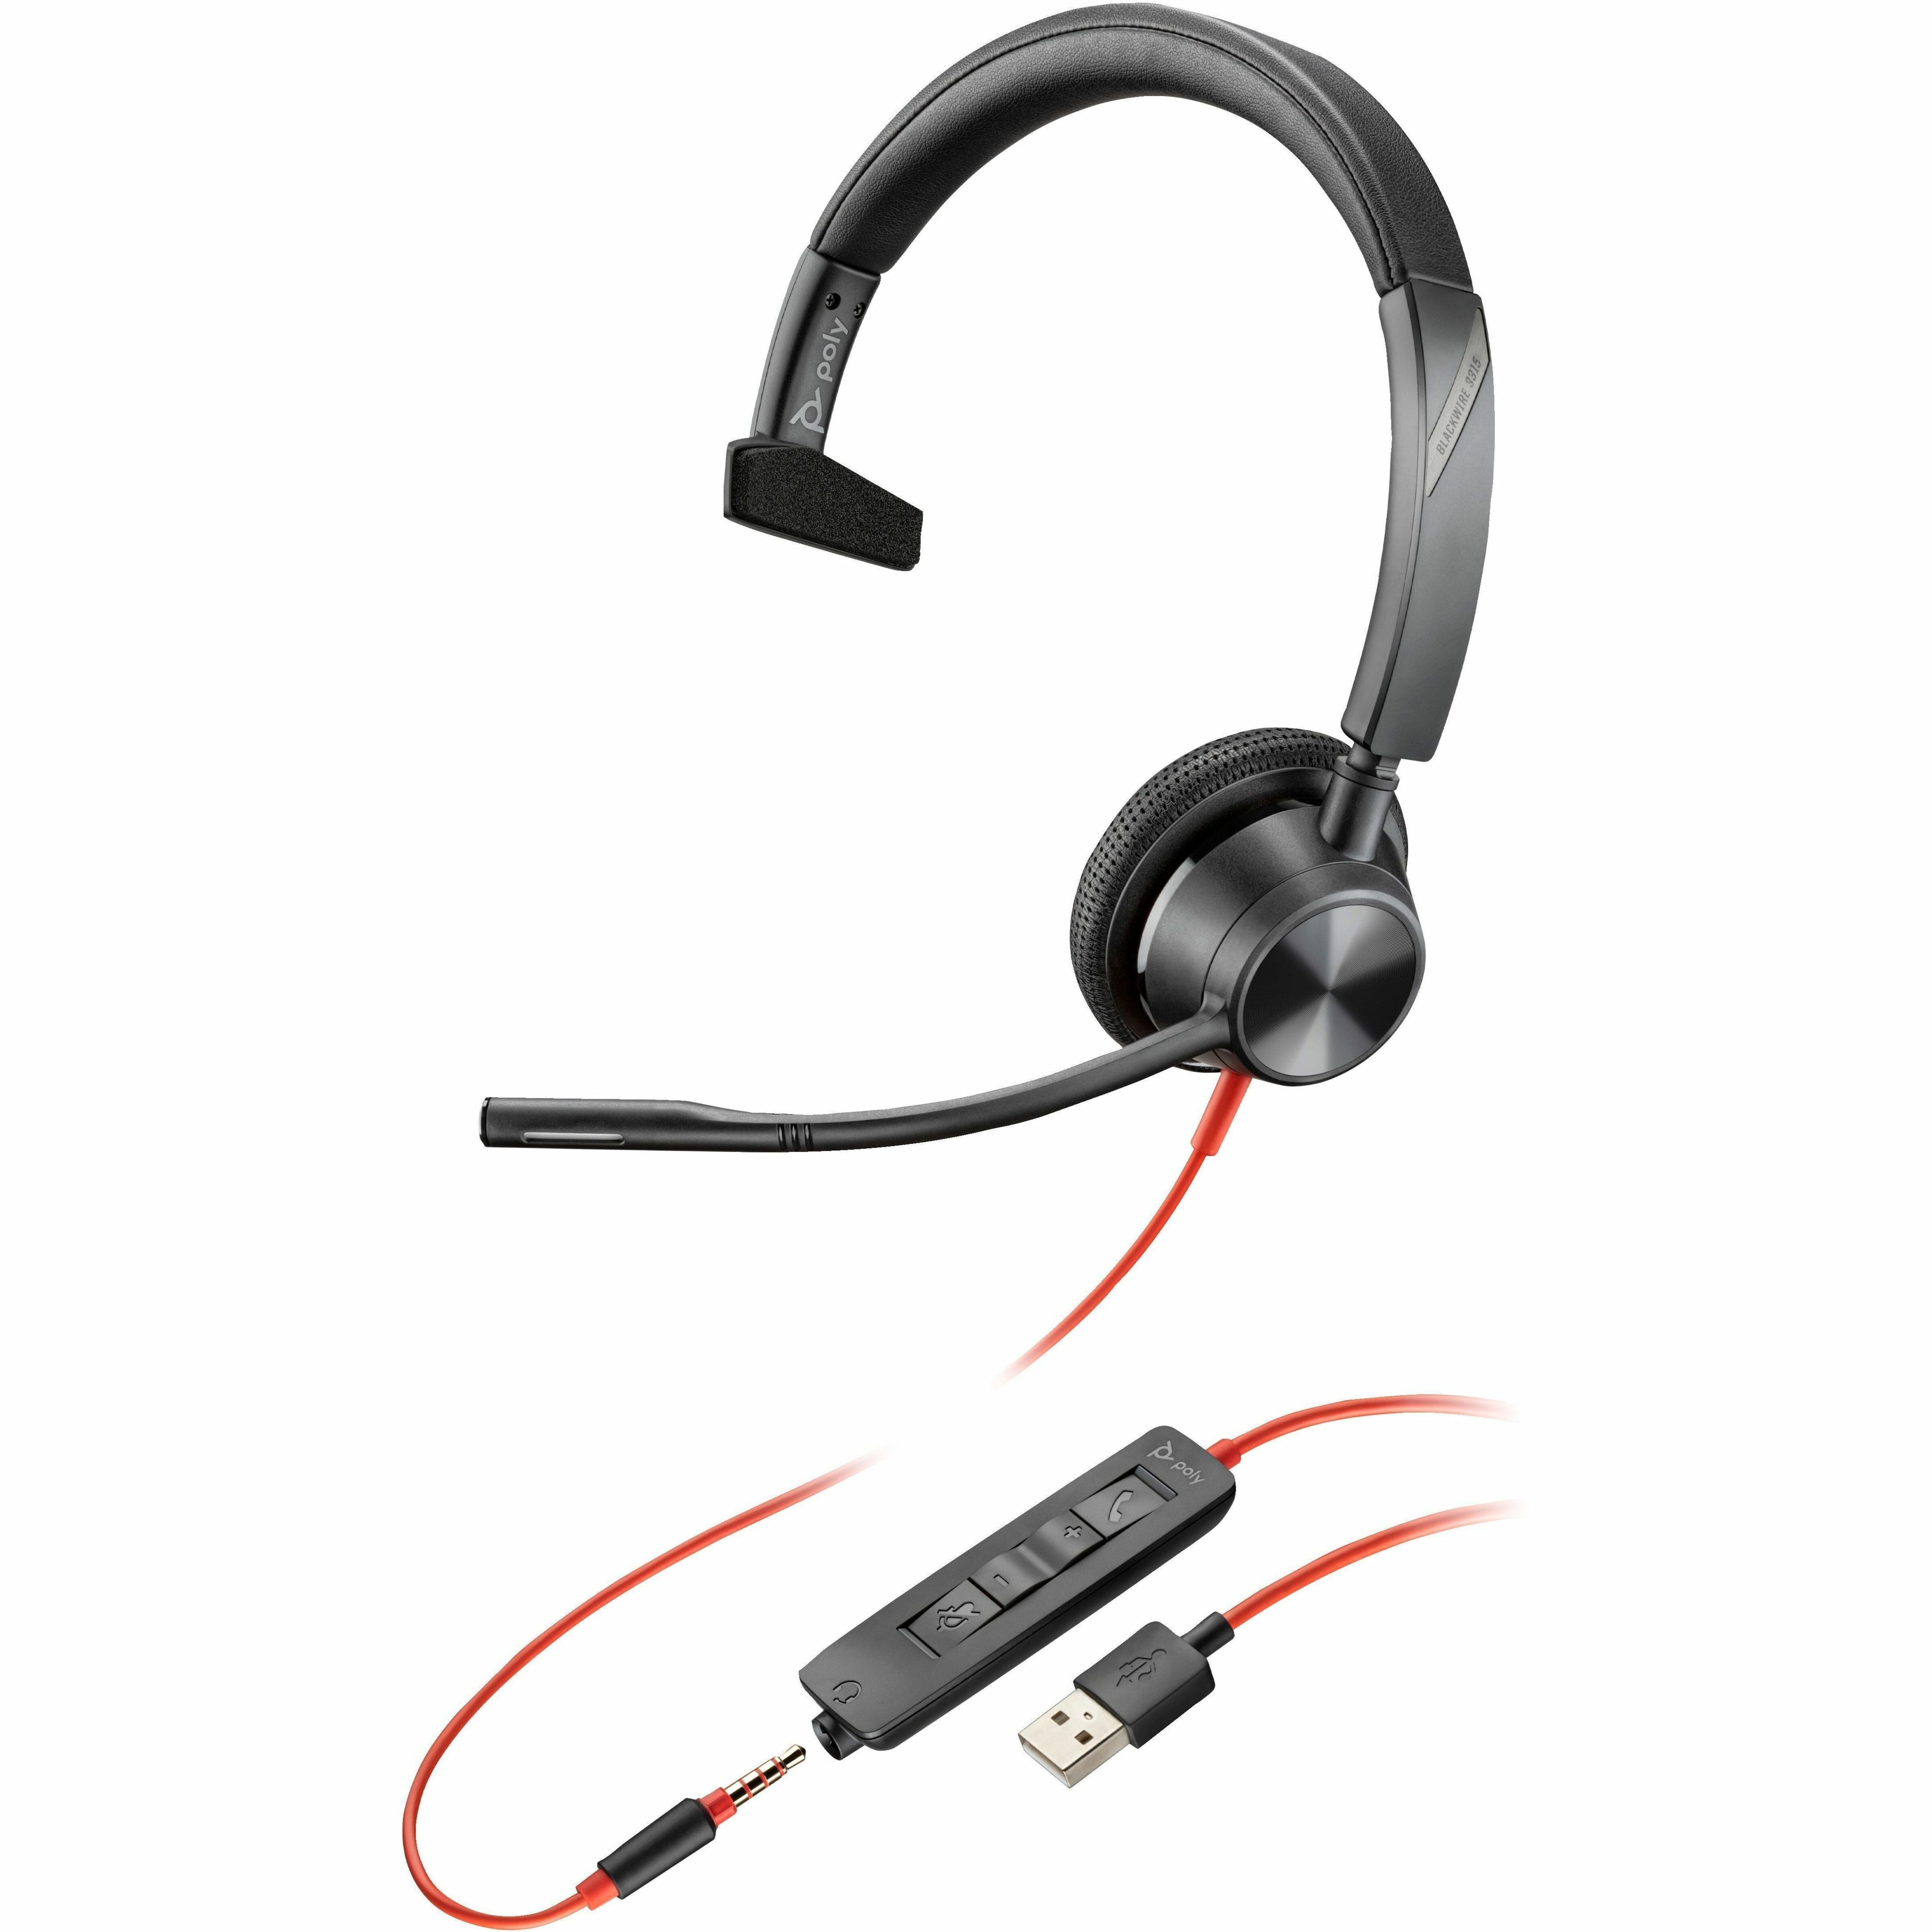 HP 76J12AA Blackwire BW3315 Headset, Monaural Over-the-head, USB Type A/C, 3.5mm, Noise Cancelling